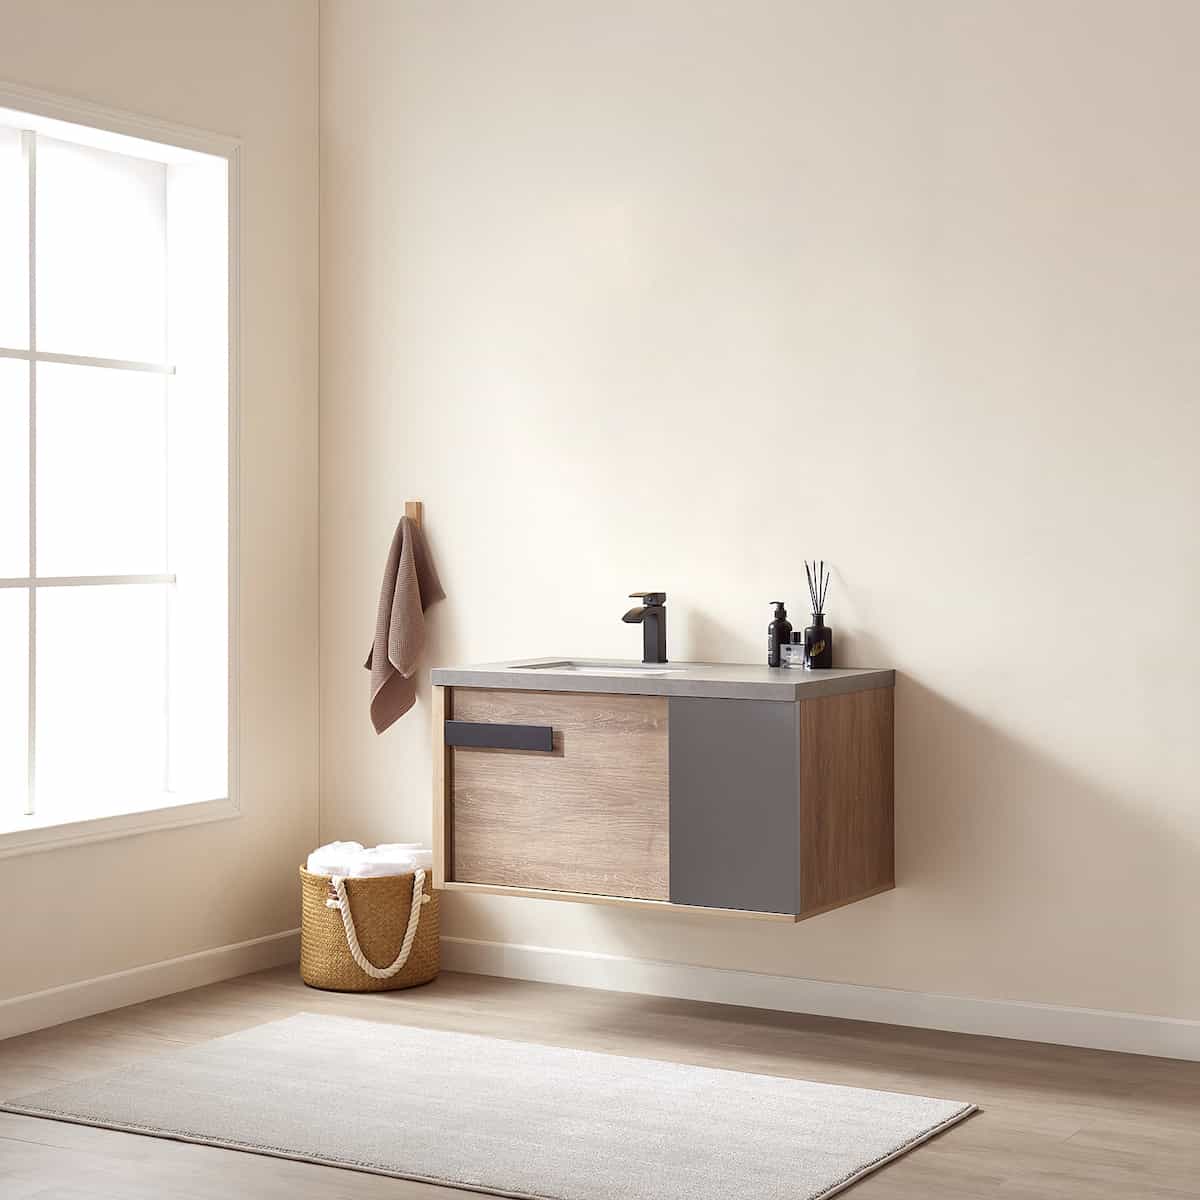 Vinnova Carcastillo 40 Inch Wall Mount Single Vanity in North American Oak with Grey Sintered Stone Top Without Mirror Side 703240-NO-WK-NM